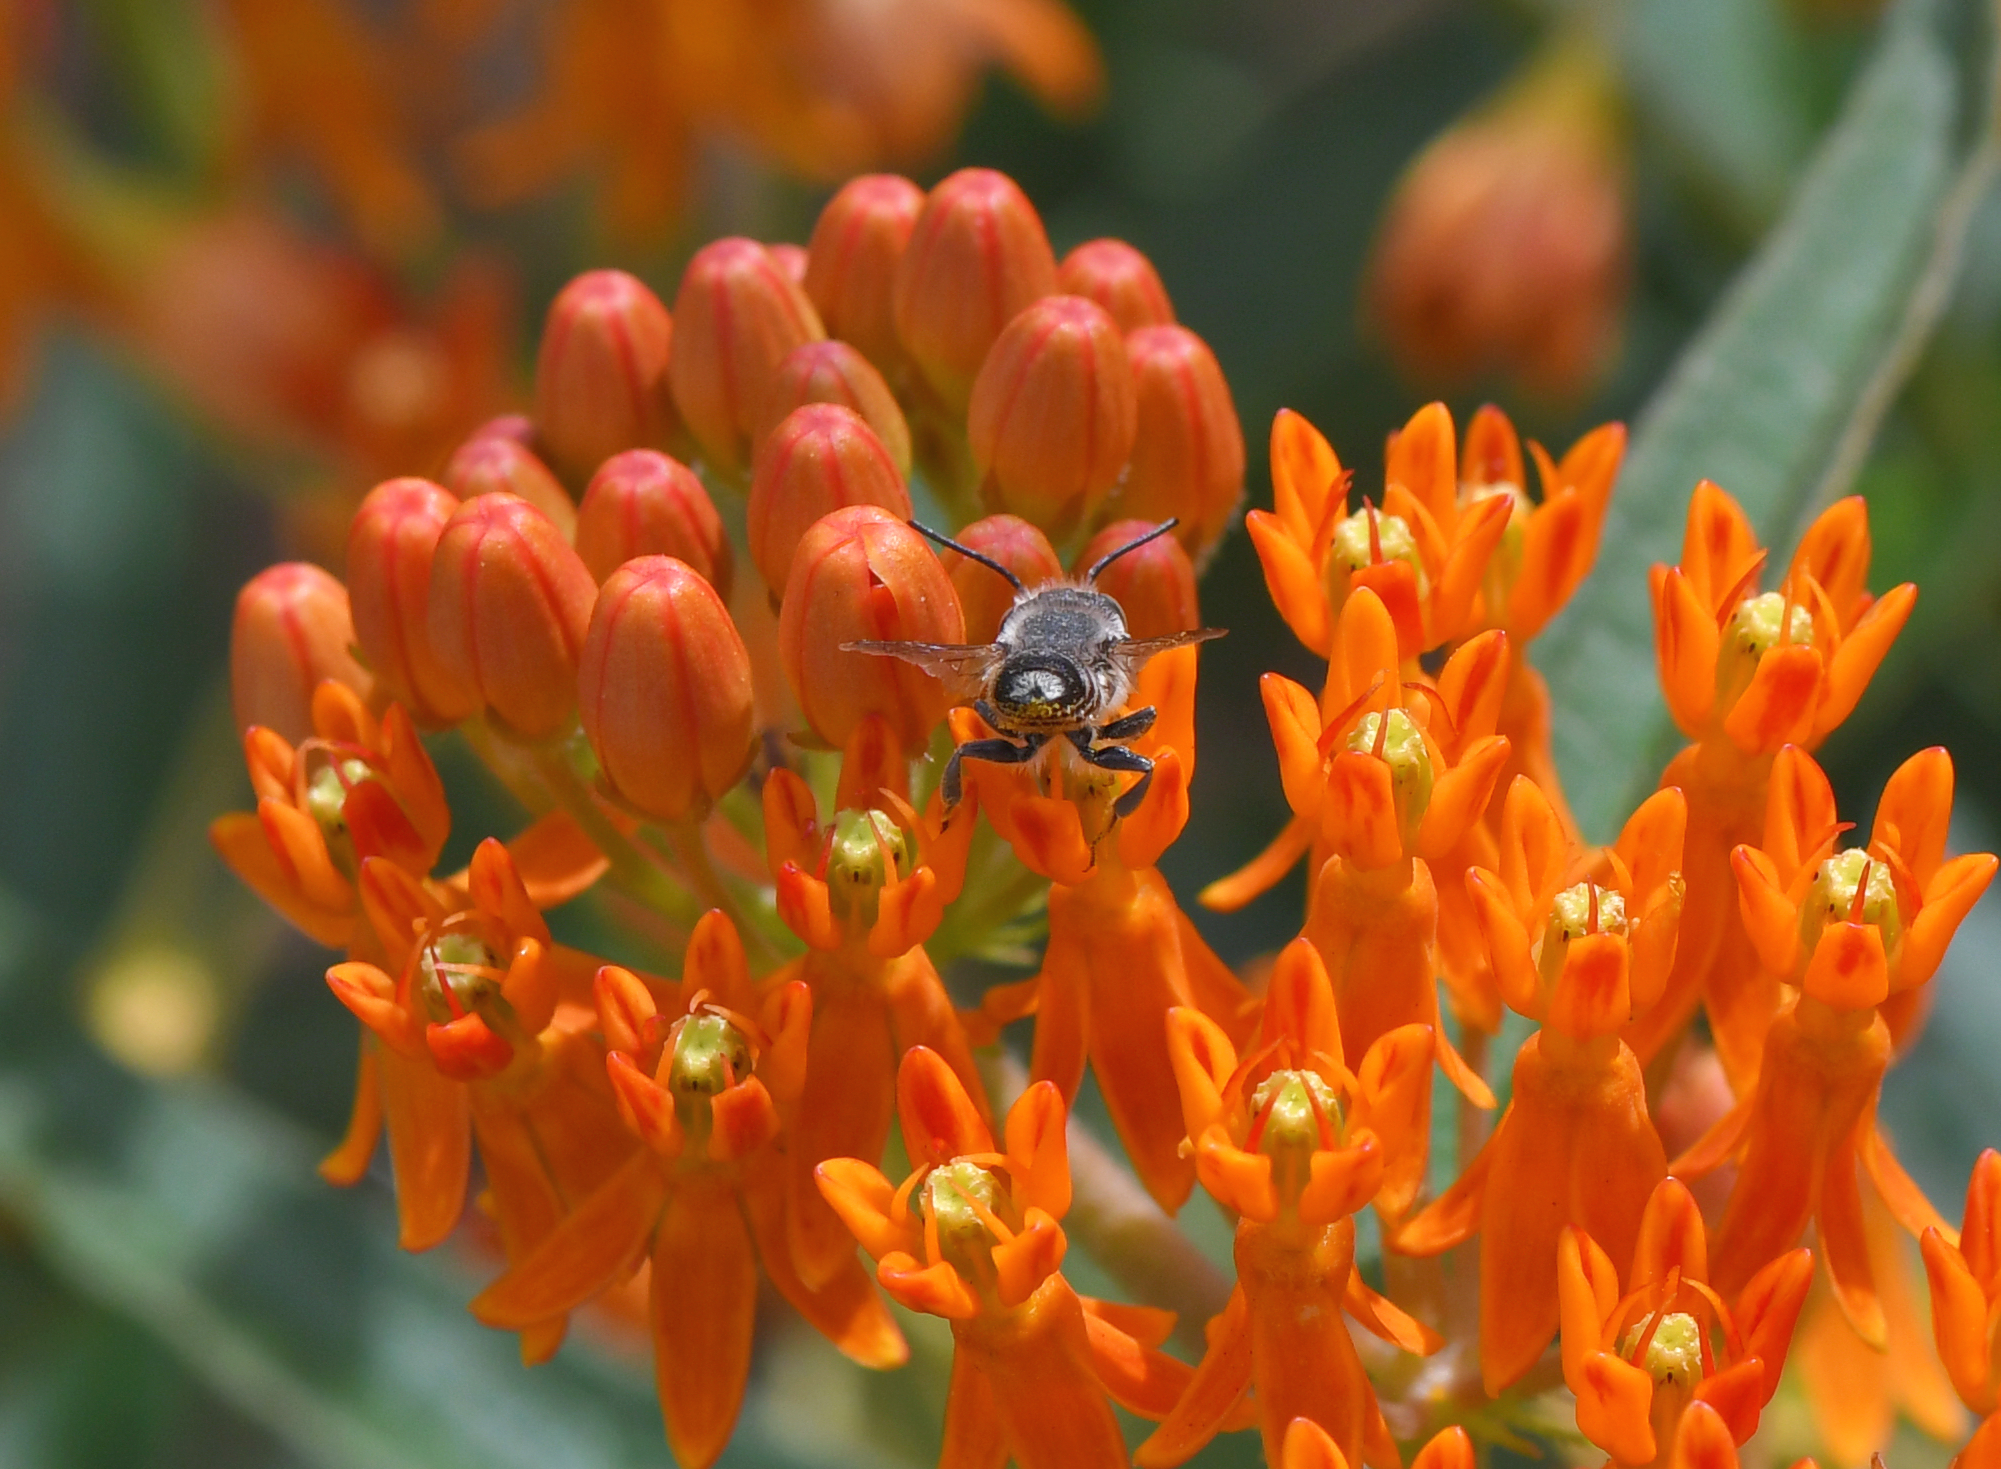 Honey bee, Apis mellifera, visiting Butterfly weed, Asclepias tuberosa